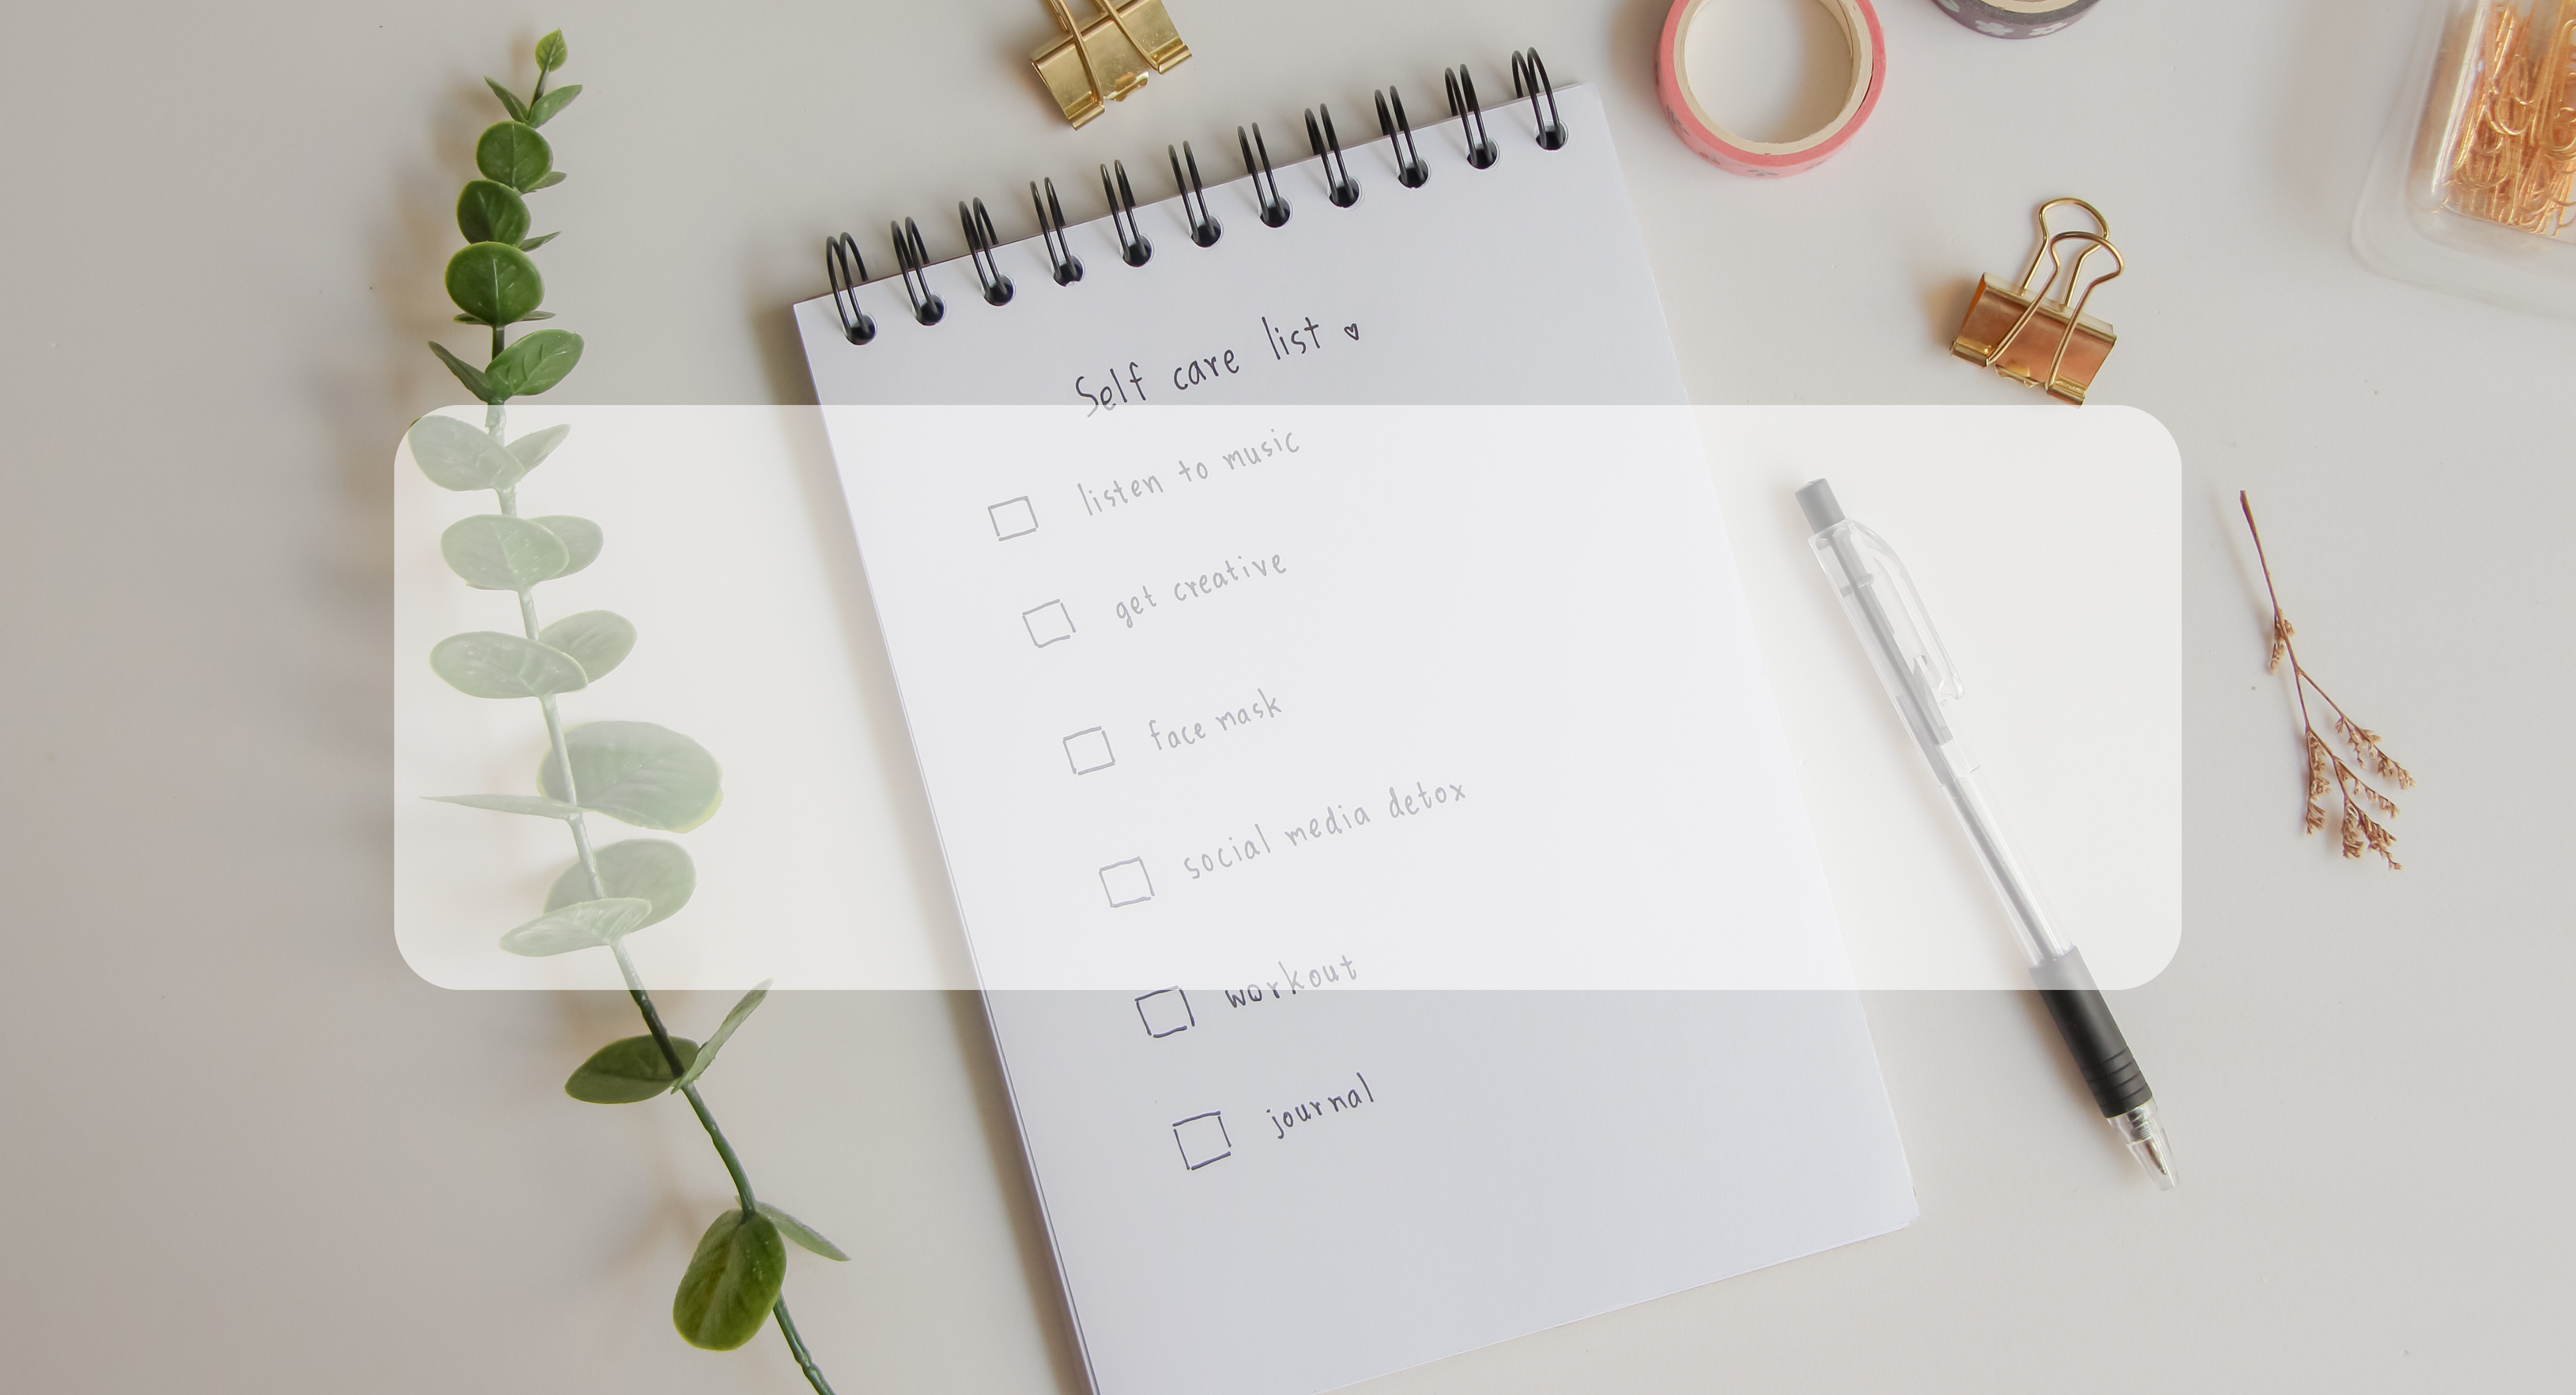 Self-Care checklist on notebook